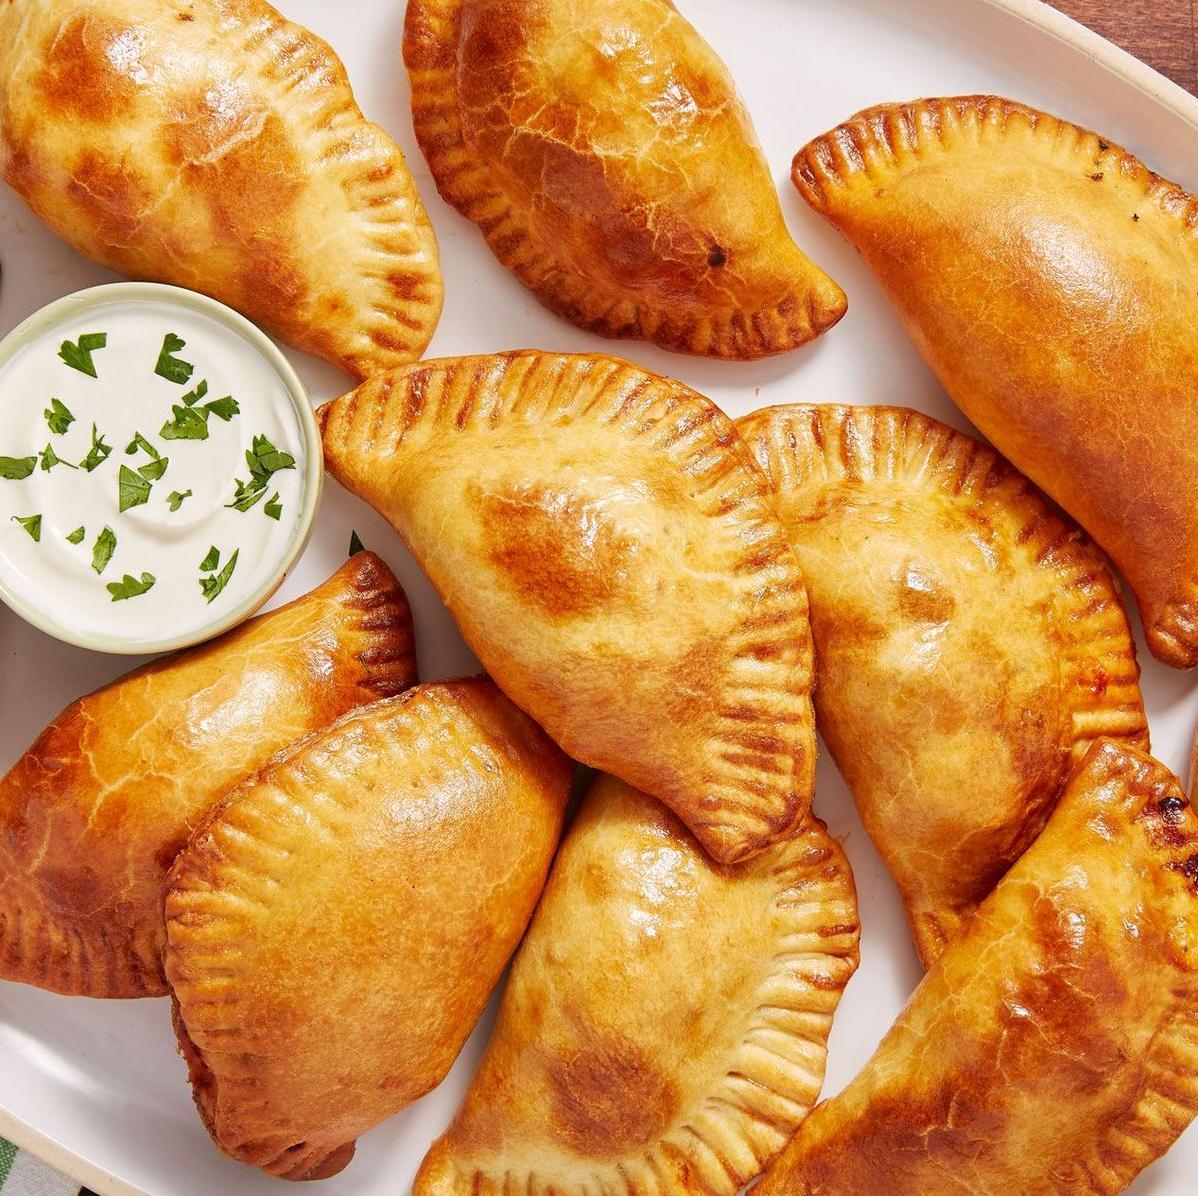  Bring a taste of Brazil to your dinner table with these meat empanadas.